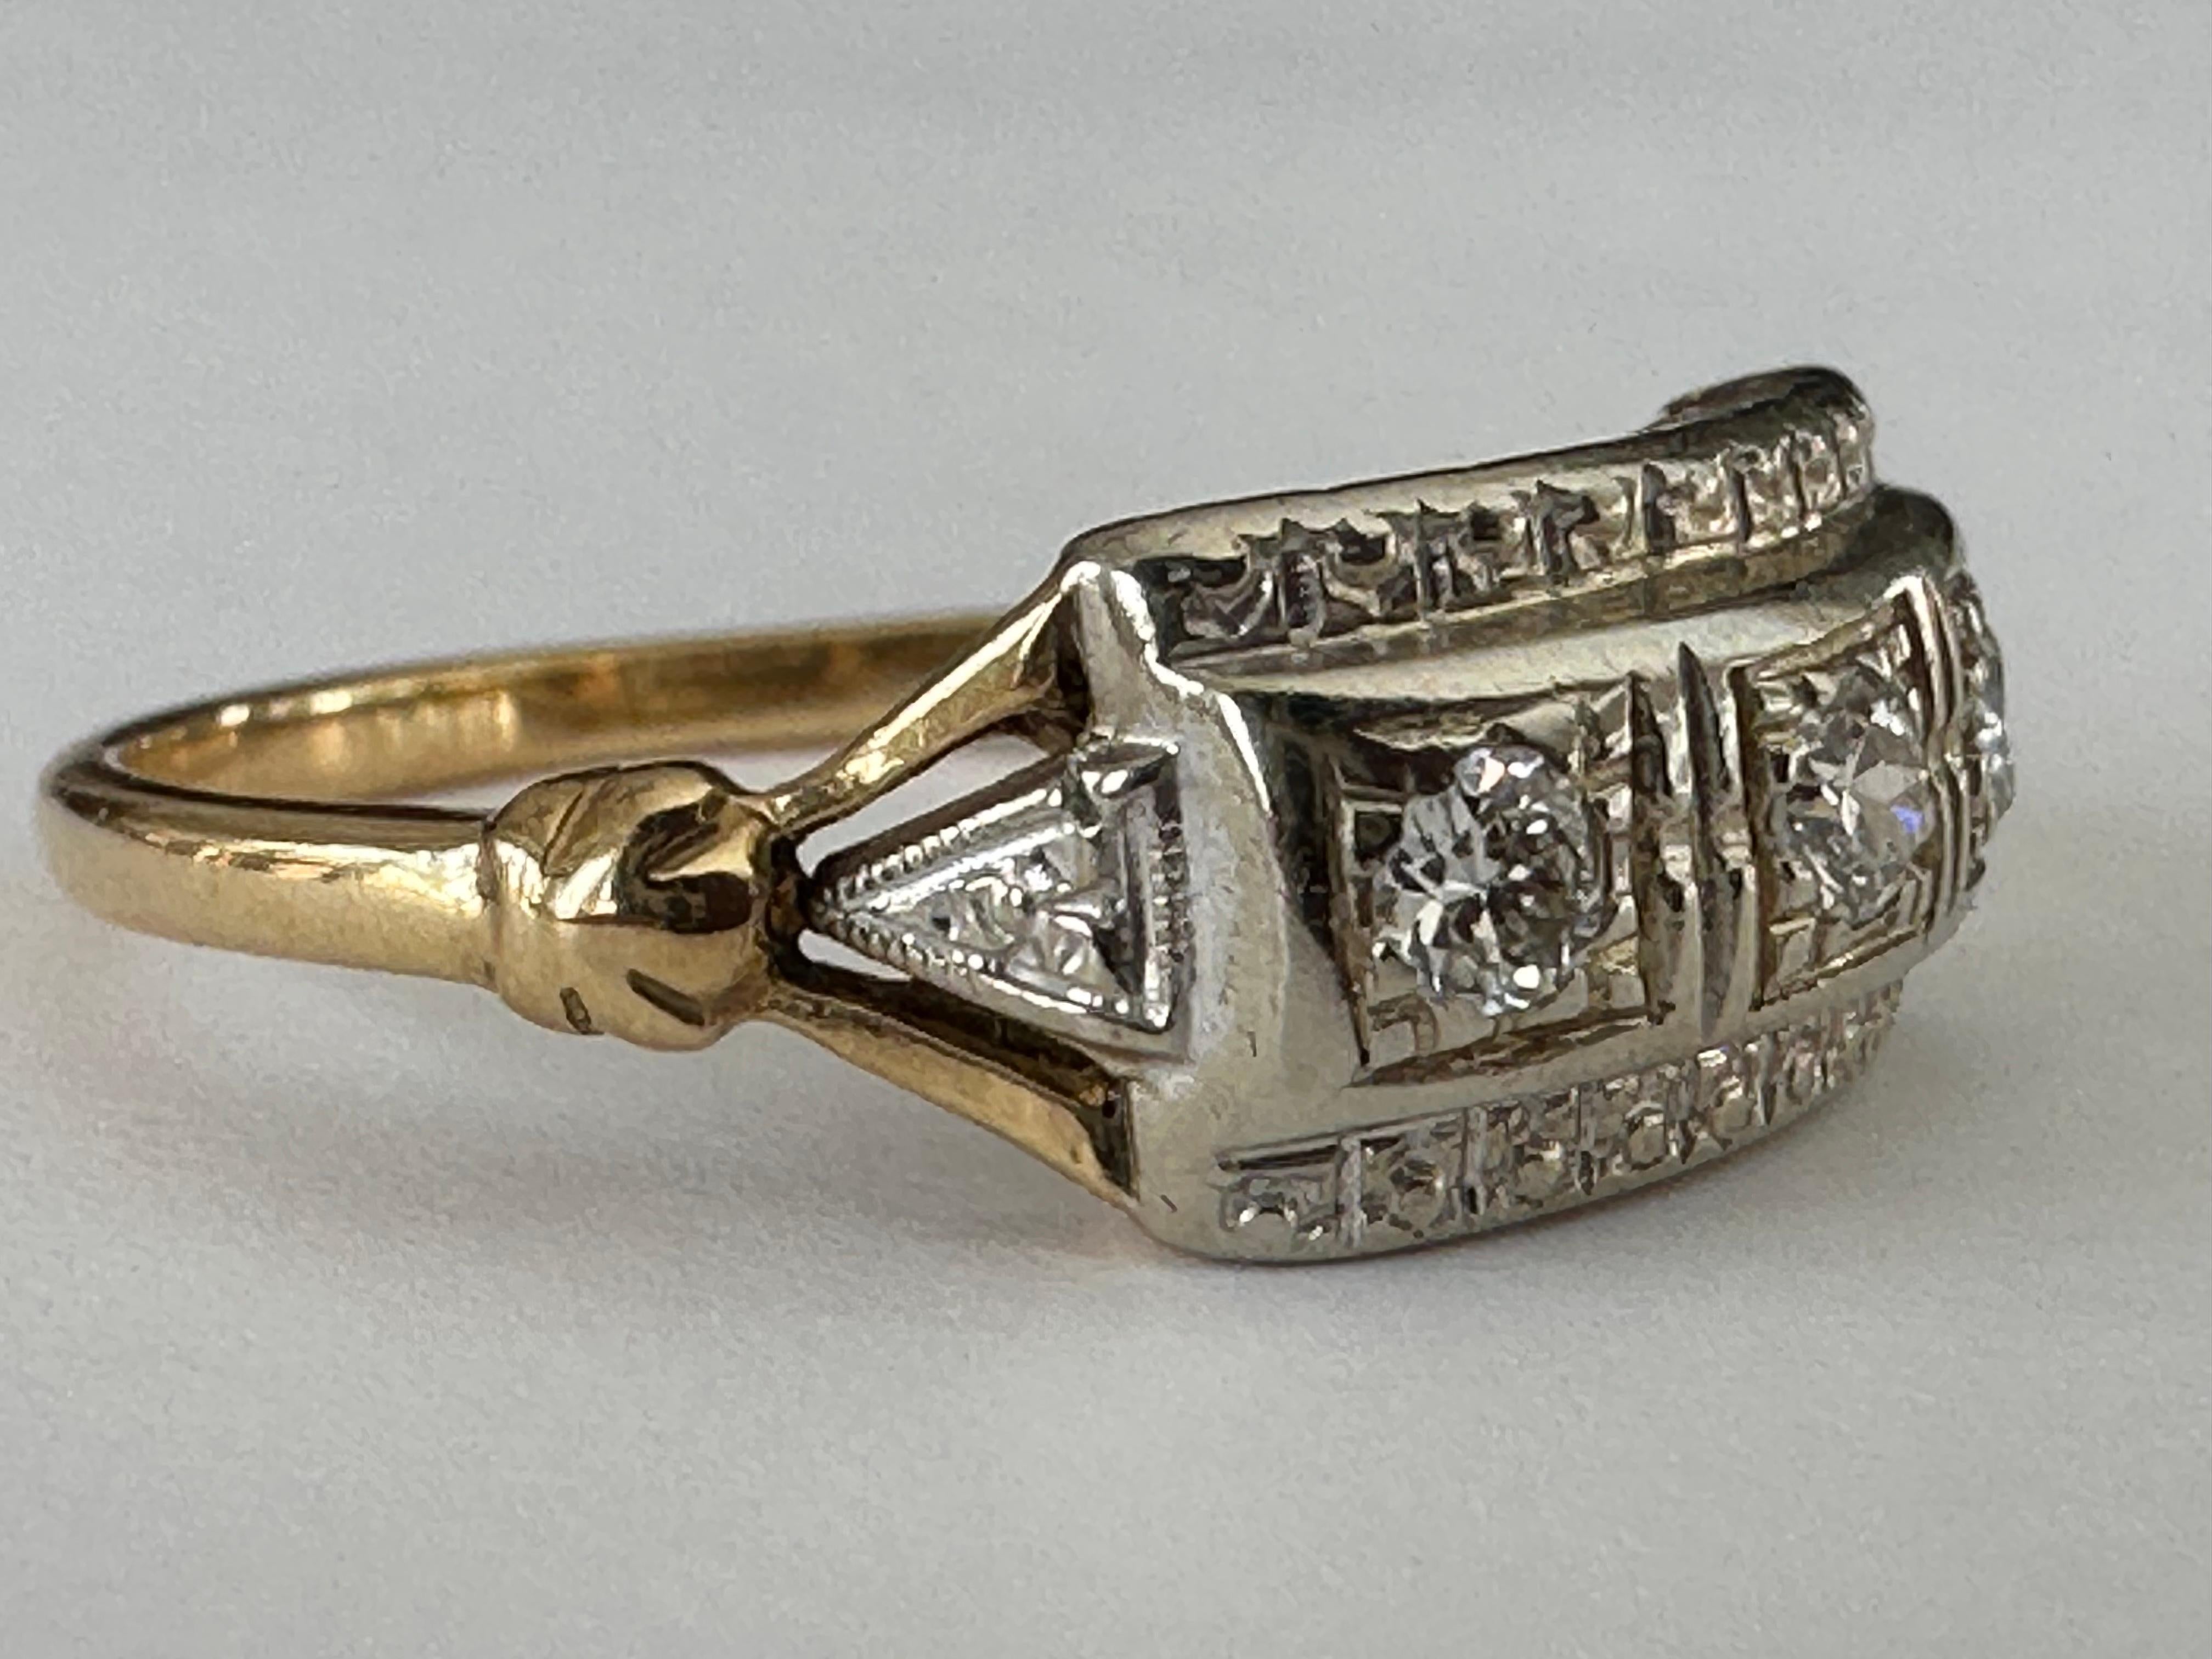 Crafted in the 1950s from 14kt yellow and white gold, this stunning Mid-Century two tone band is designed around three Old European cut diamonds totaling approximately 0.18 carats, H color, VS clarity with an East-West orientation. 